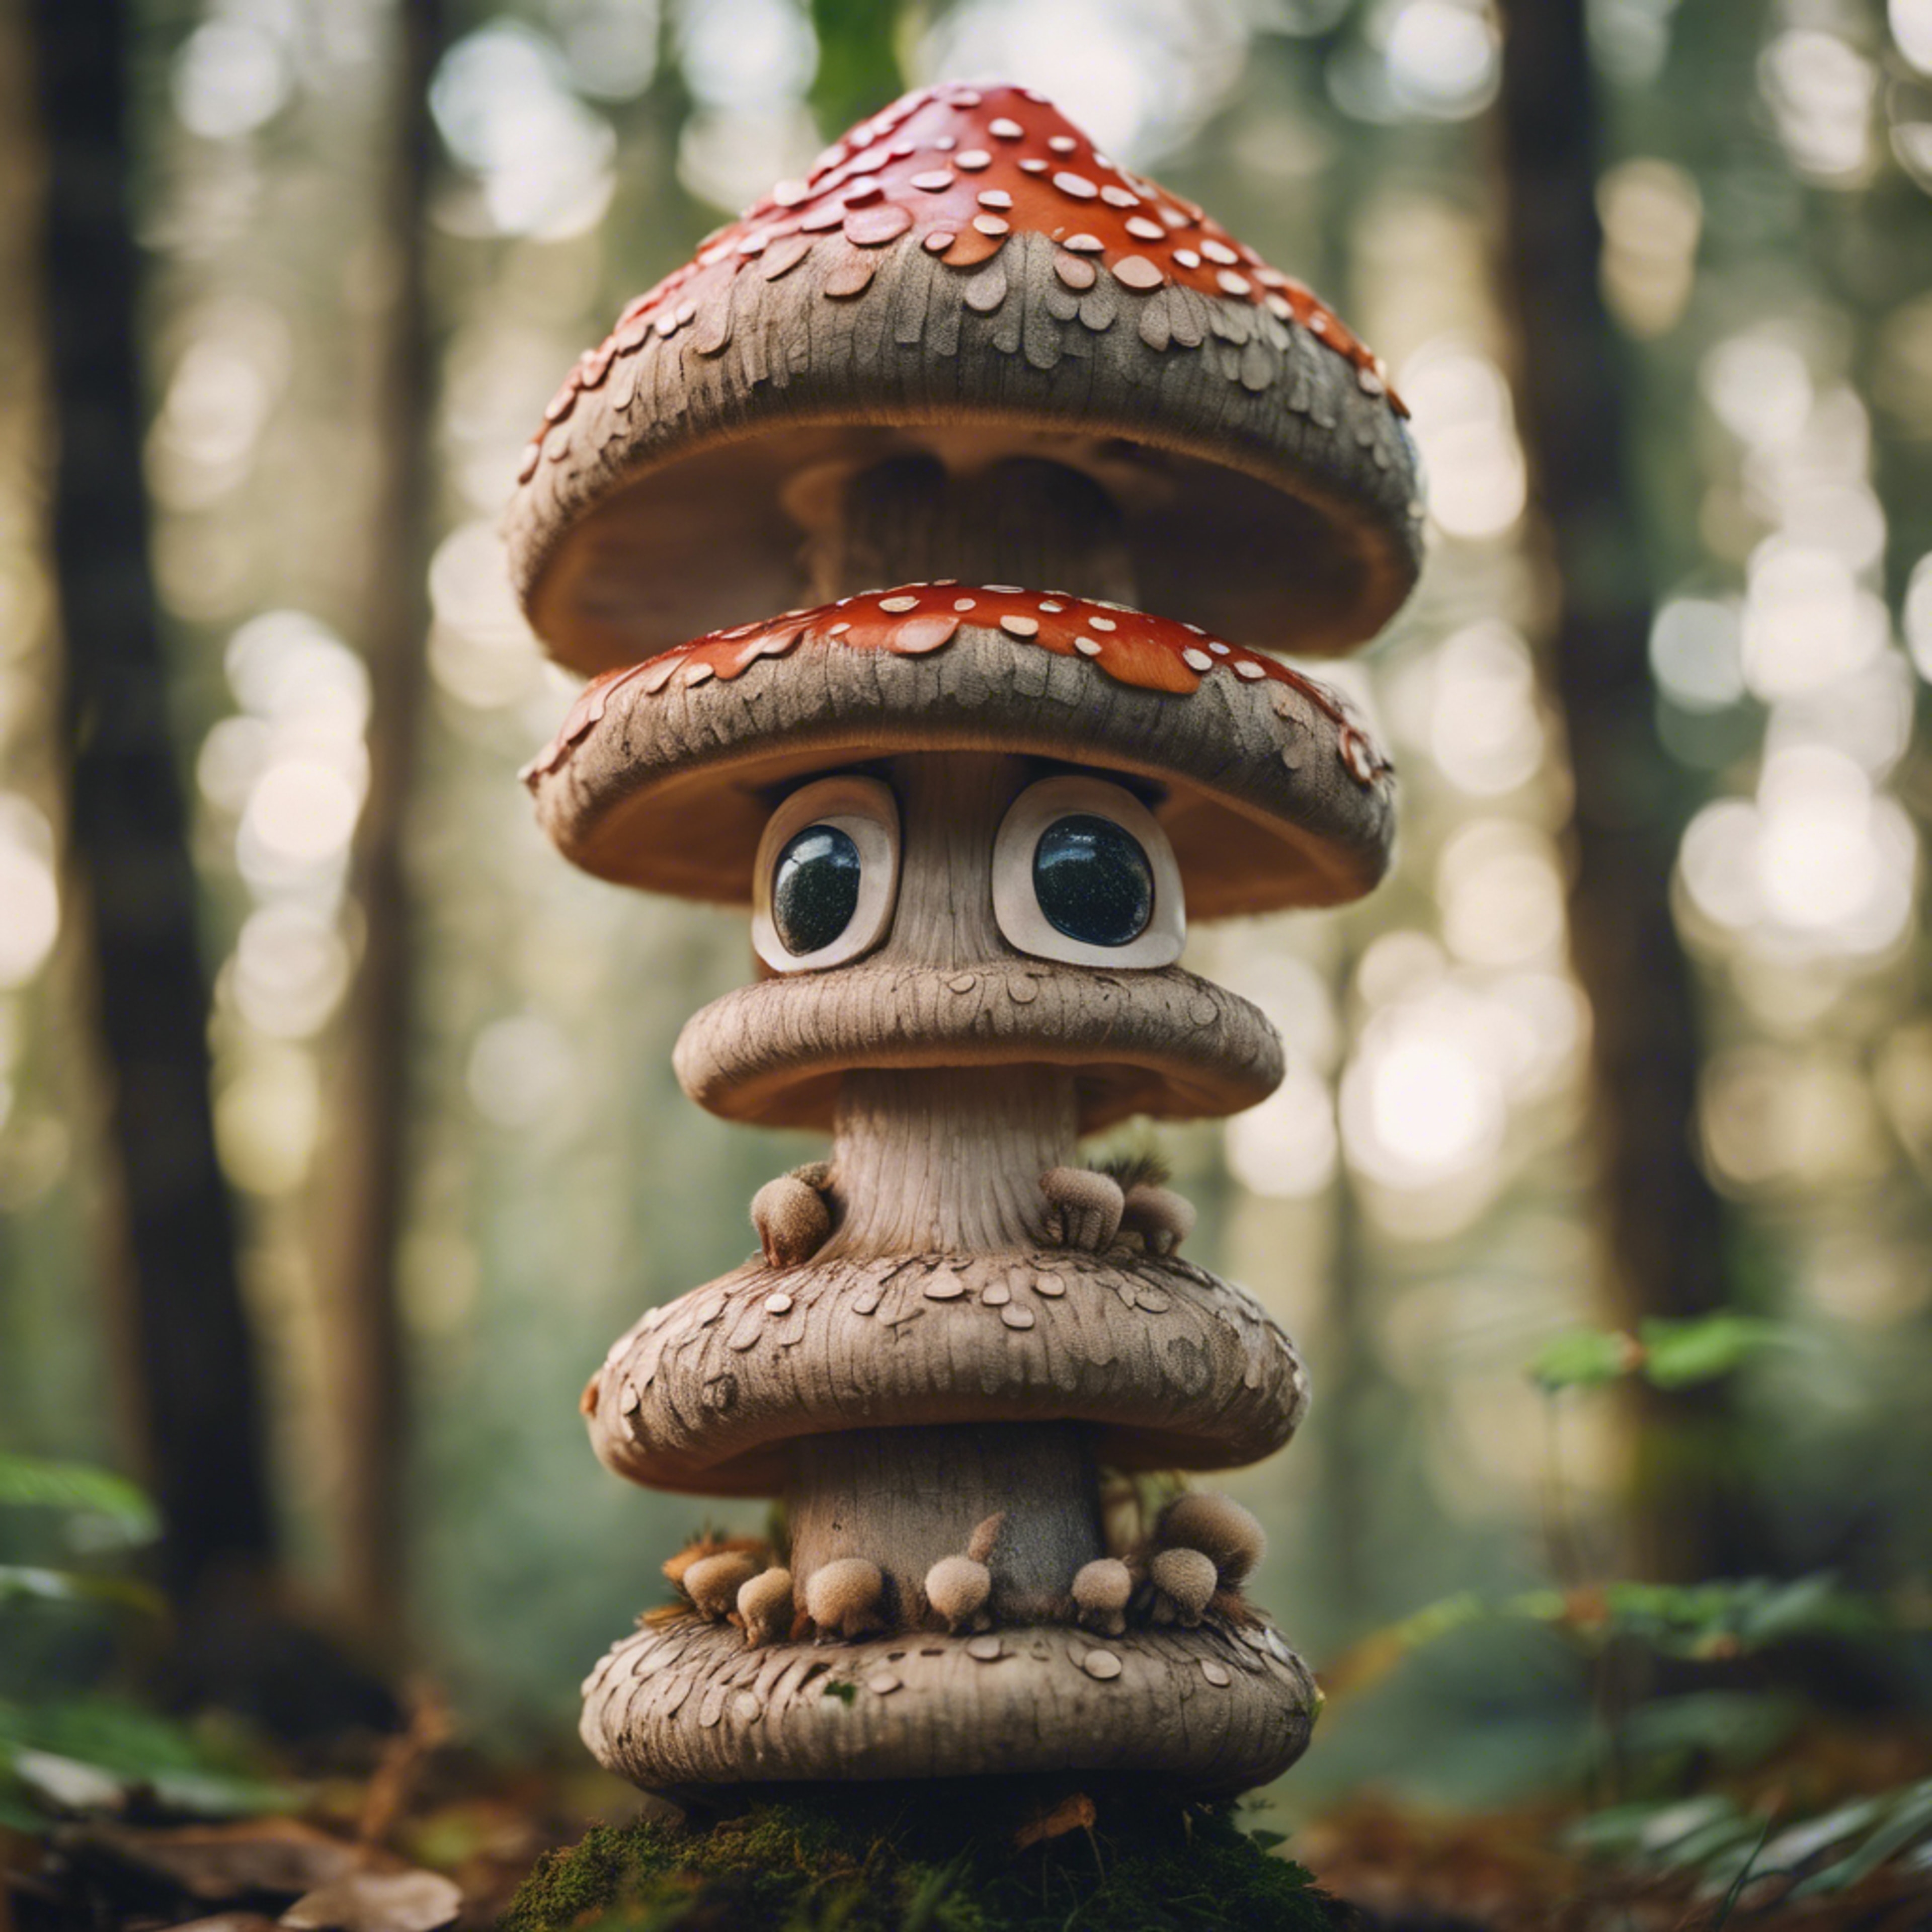 A couple of cute Mushrooms playfully stacking up to form a totem pole in a whimsical forest. Hintergrund[433a45e1c3f24476b32f]